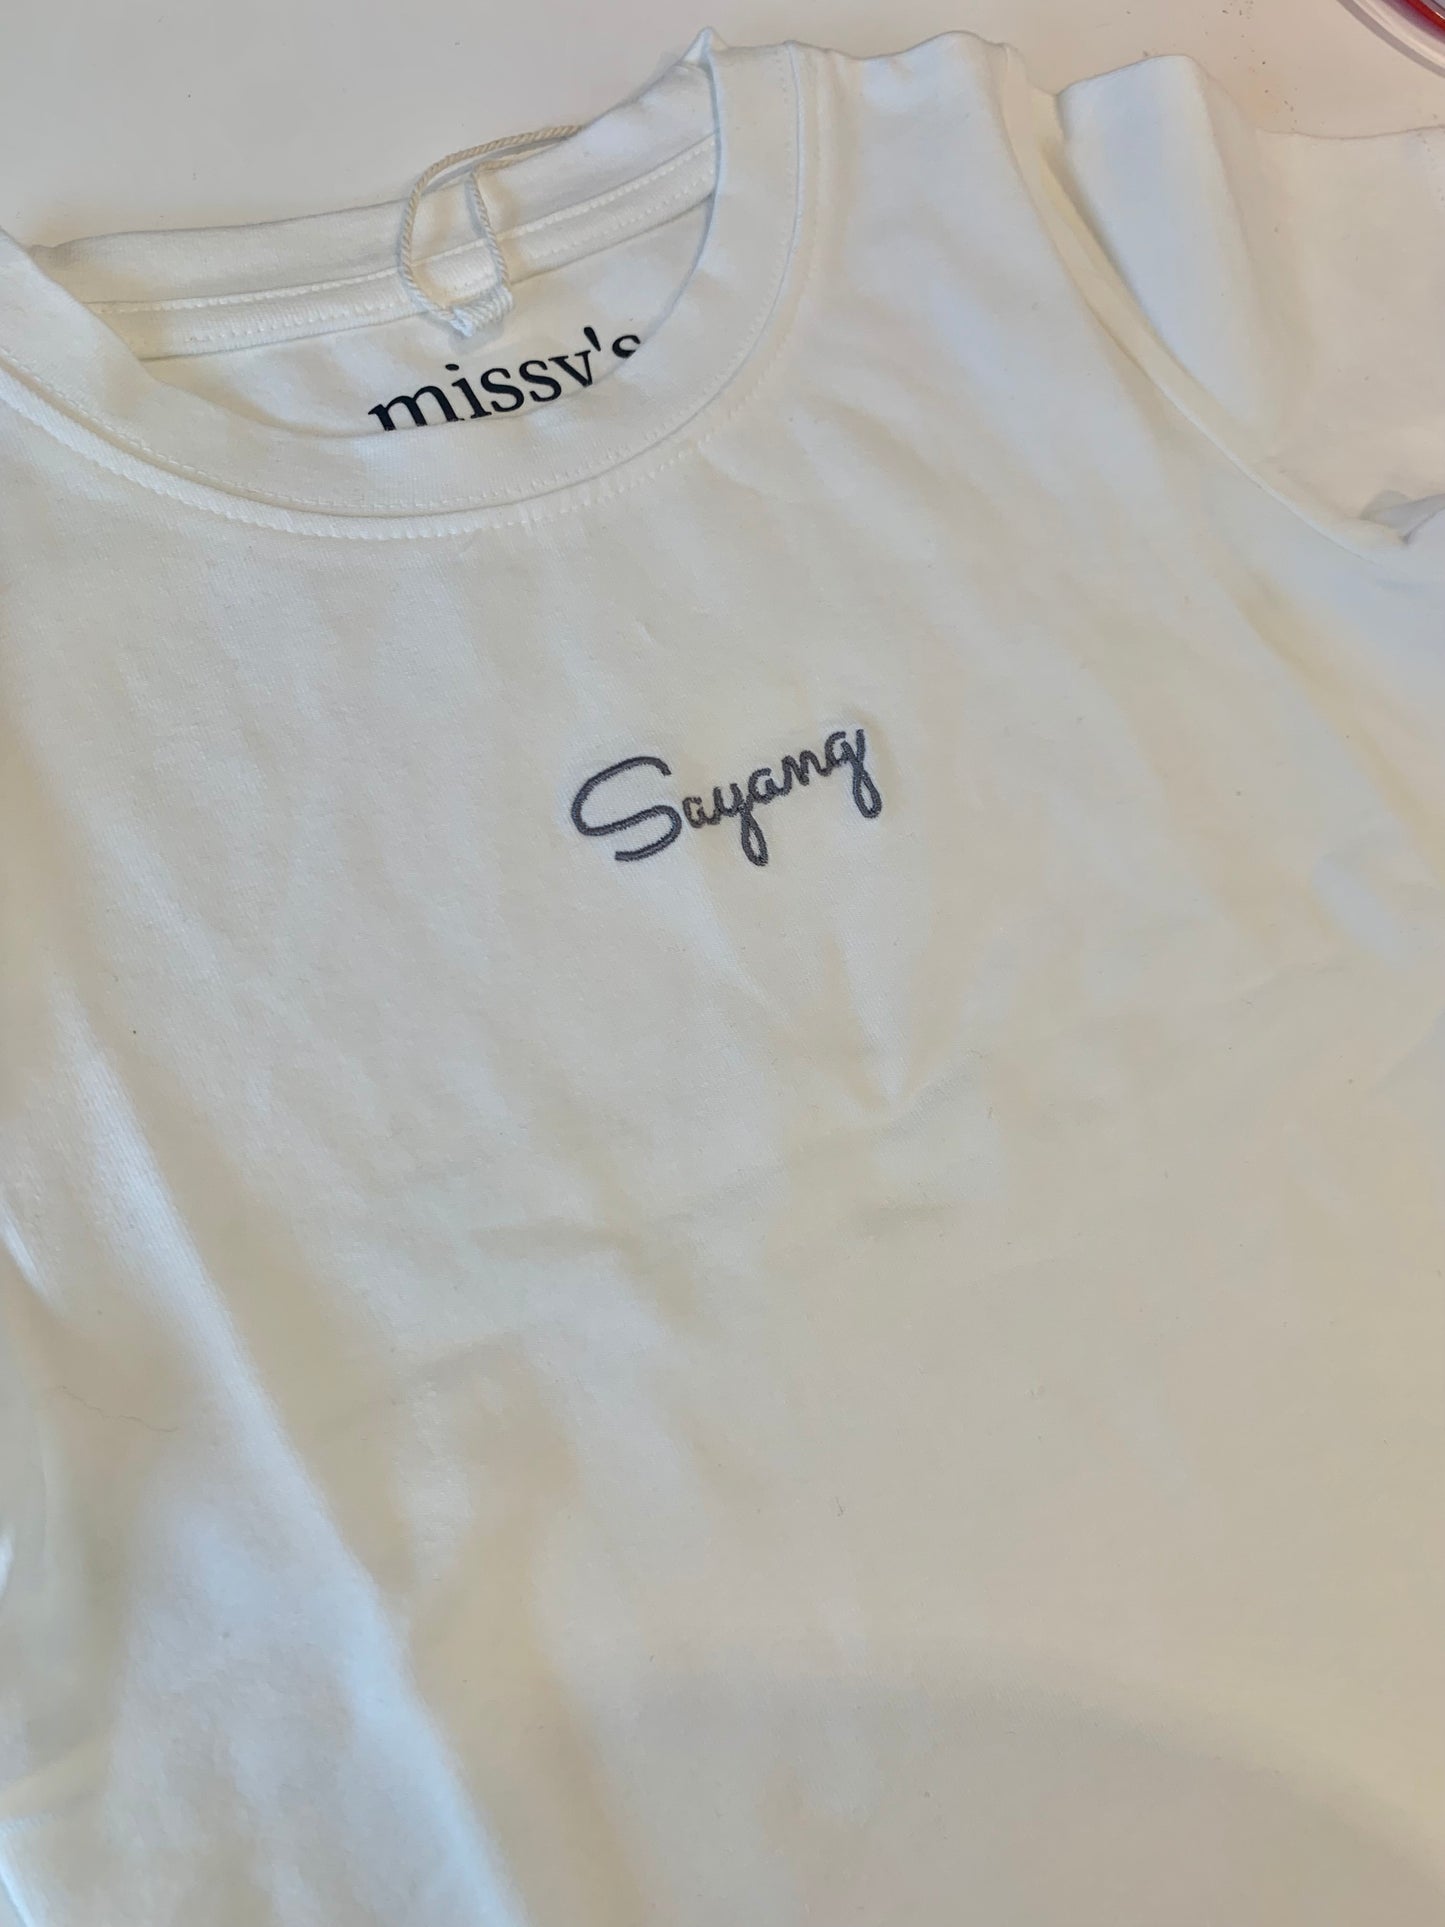 missy's original “sayang” embroidered organic cotton family T-shirt